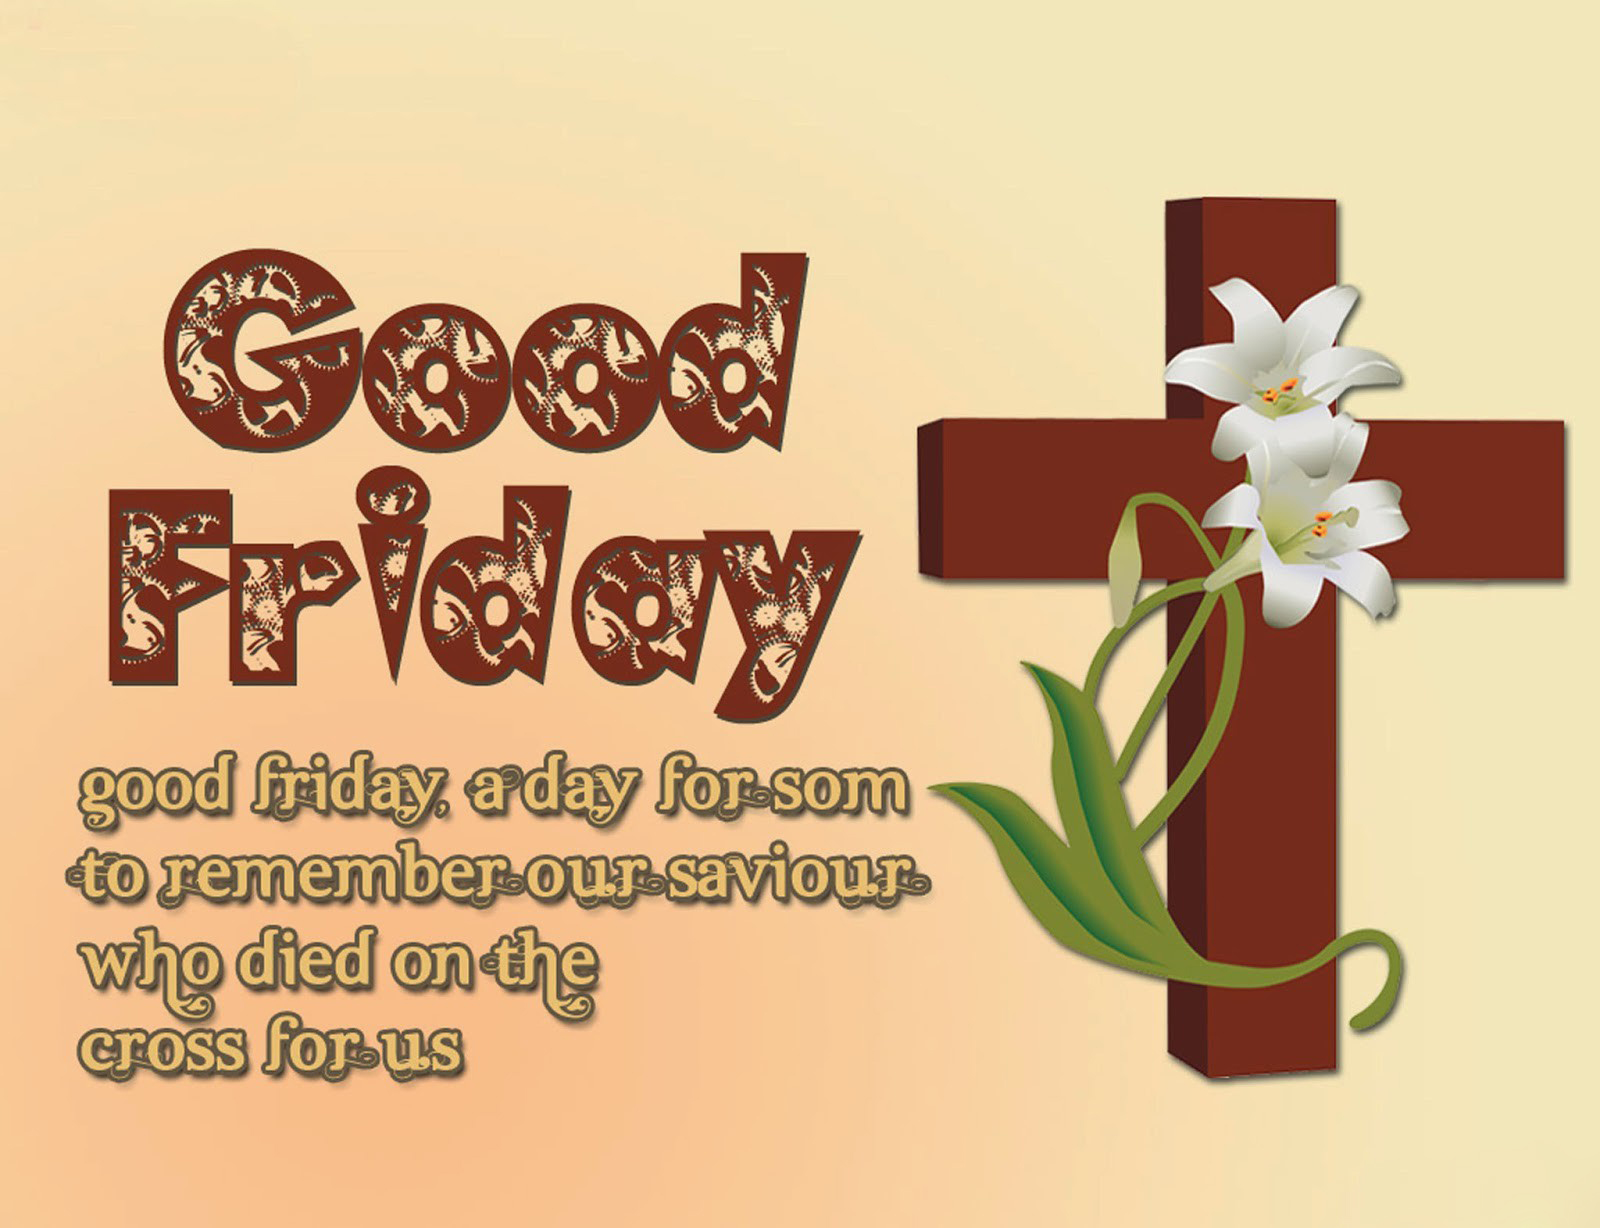 happy good friday free awesome image for mobile